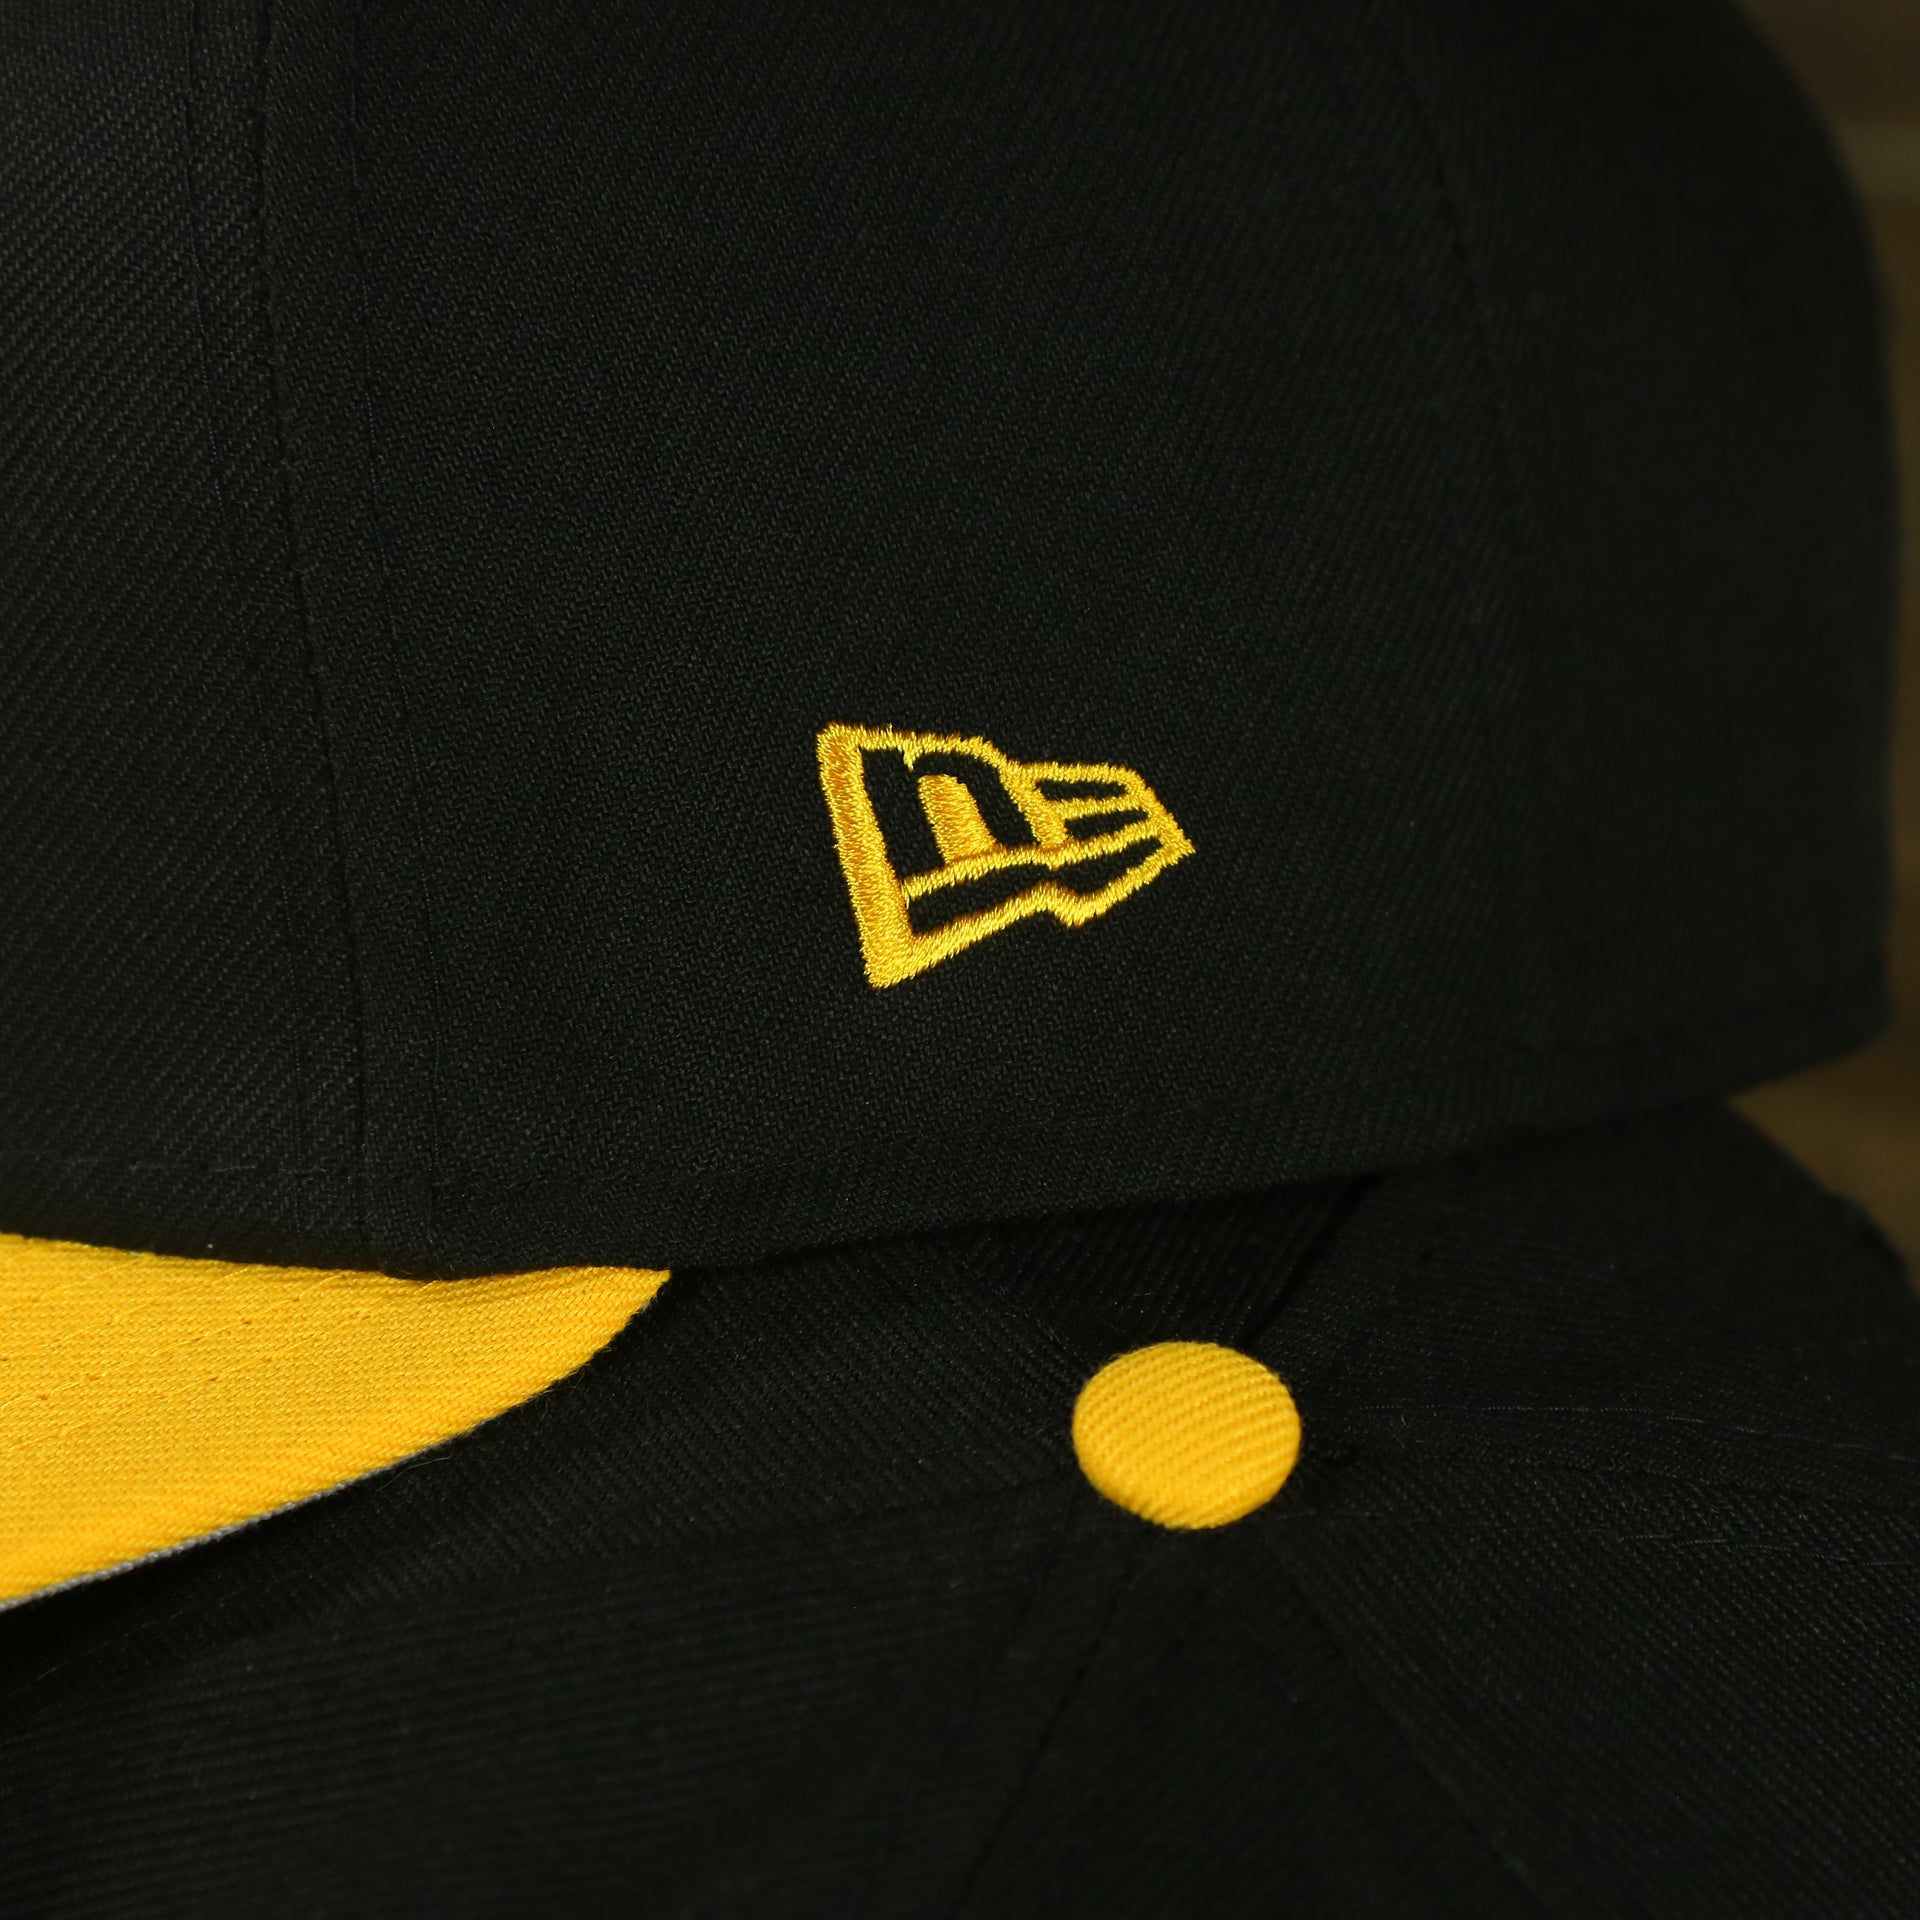 new era logo on the Pittsburgh Steelers "Team Script" College Bar 9Fifty Snapback Hat | Black/Yellow Steelers 950 Snap Cap